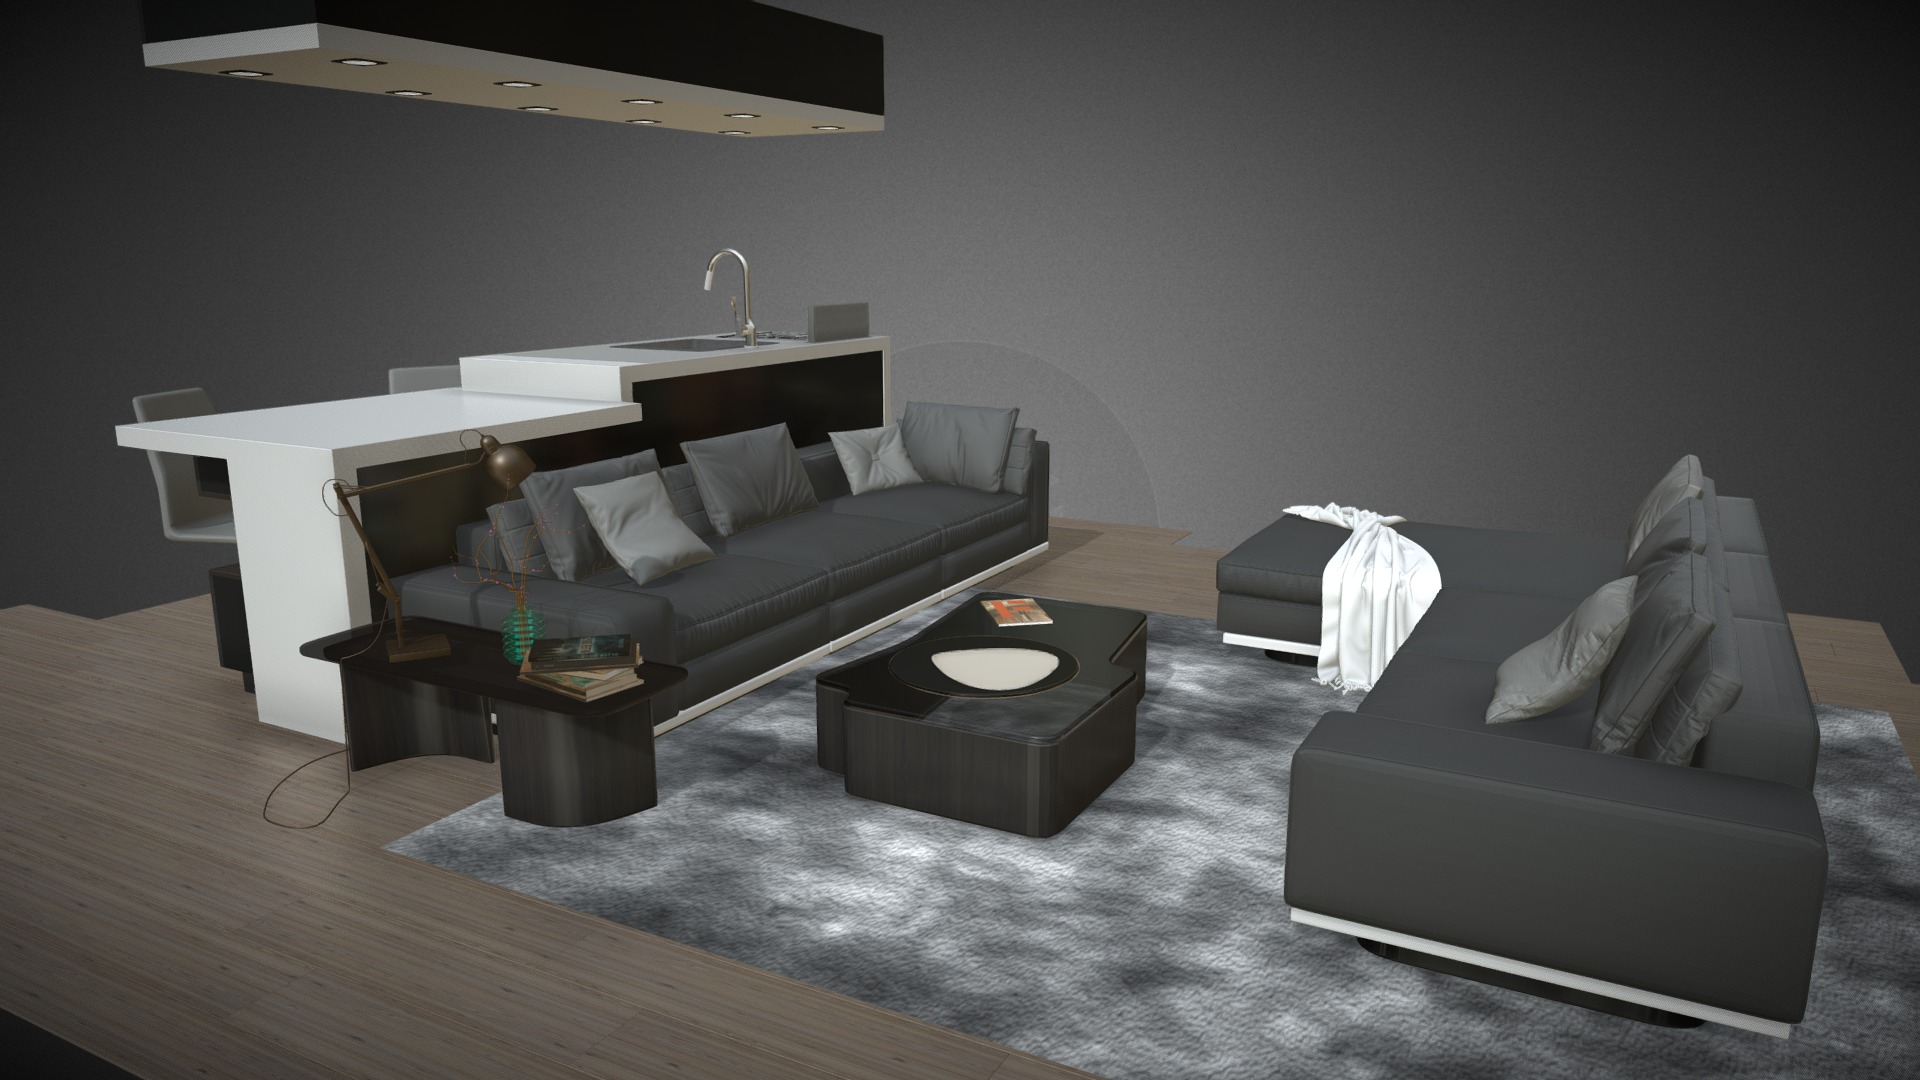 3D model living room with kitchen island - This is a 3D model of the living room with kitchen island. The 3D model is about a living room with a couch and a coffee table.